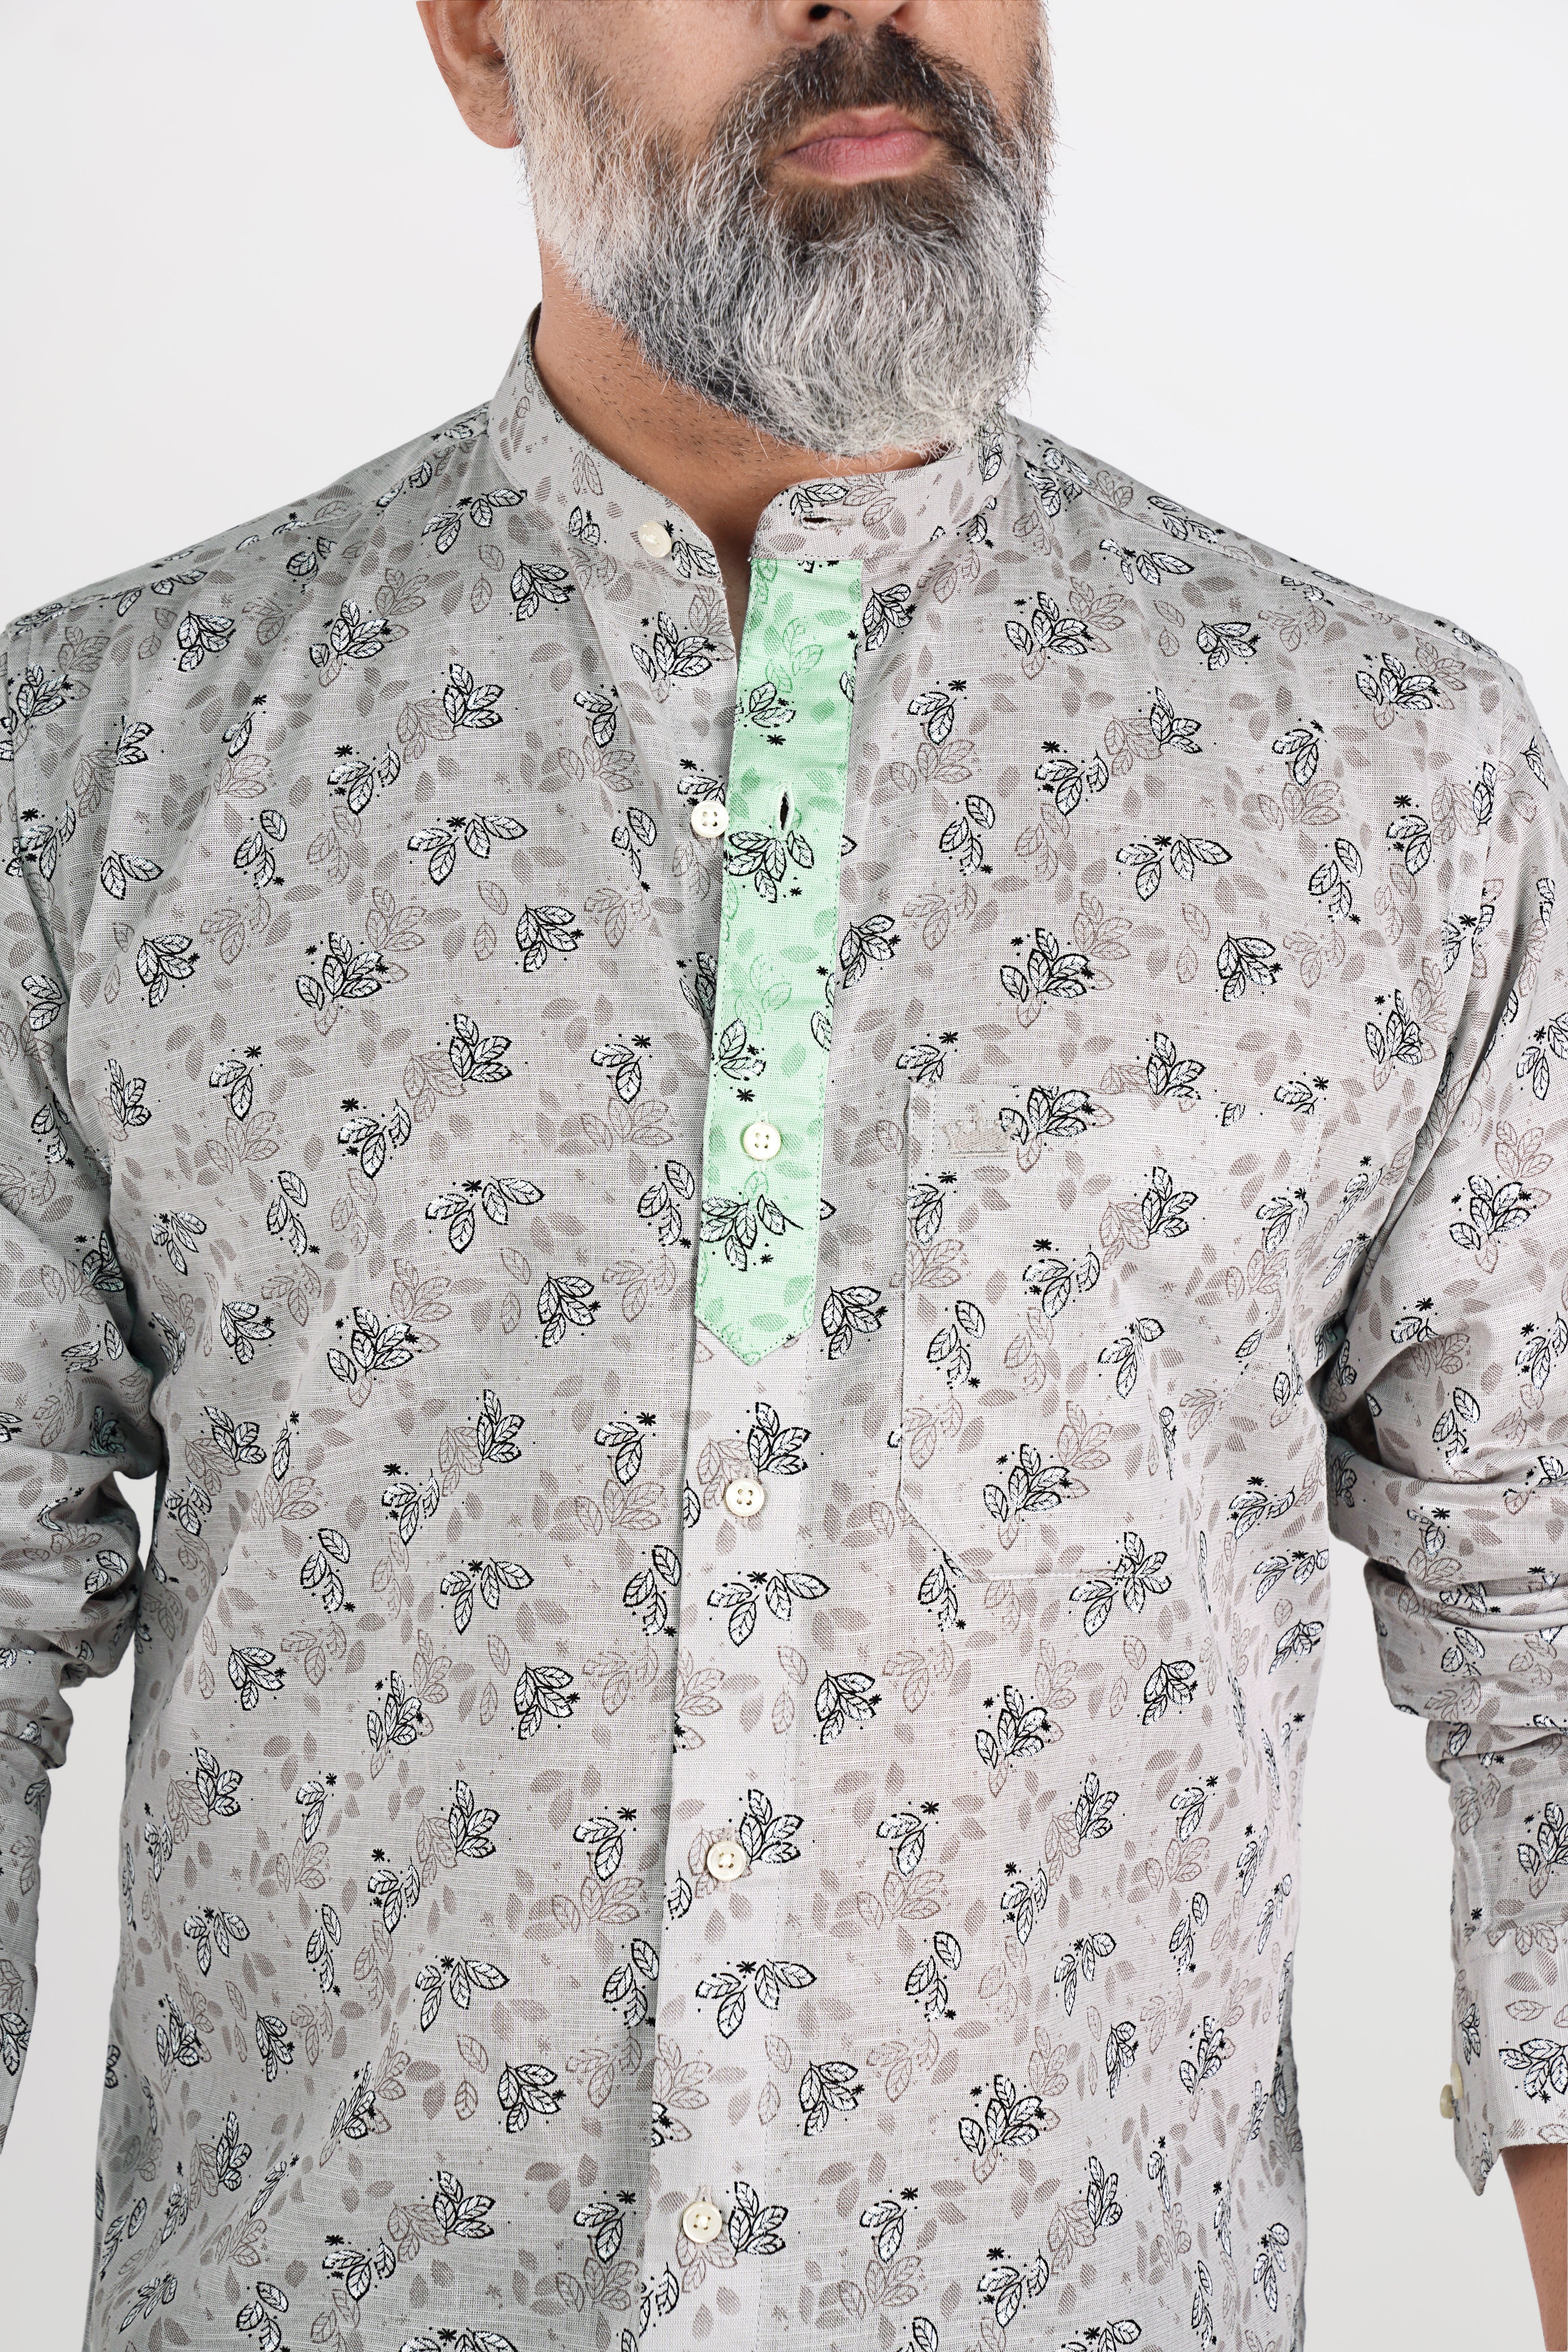 Soft Amber Gray with Thunder Black and Pale Leaf Green Luxurious Linen Designer Shirt